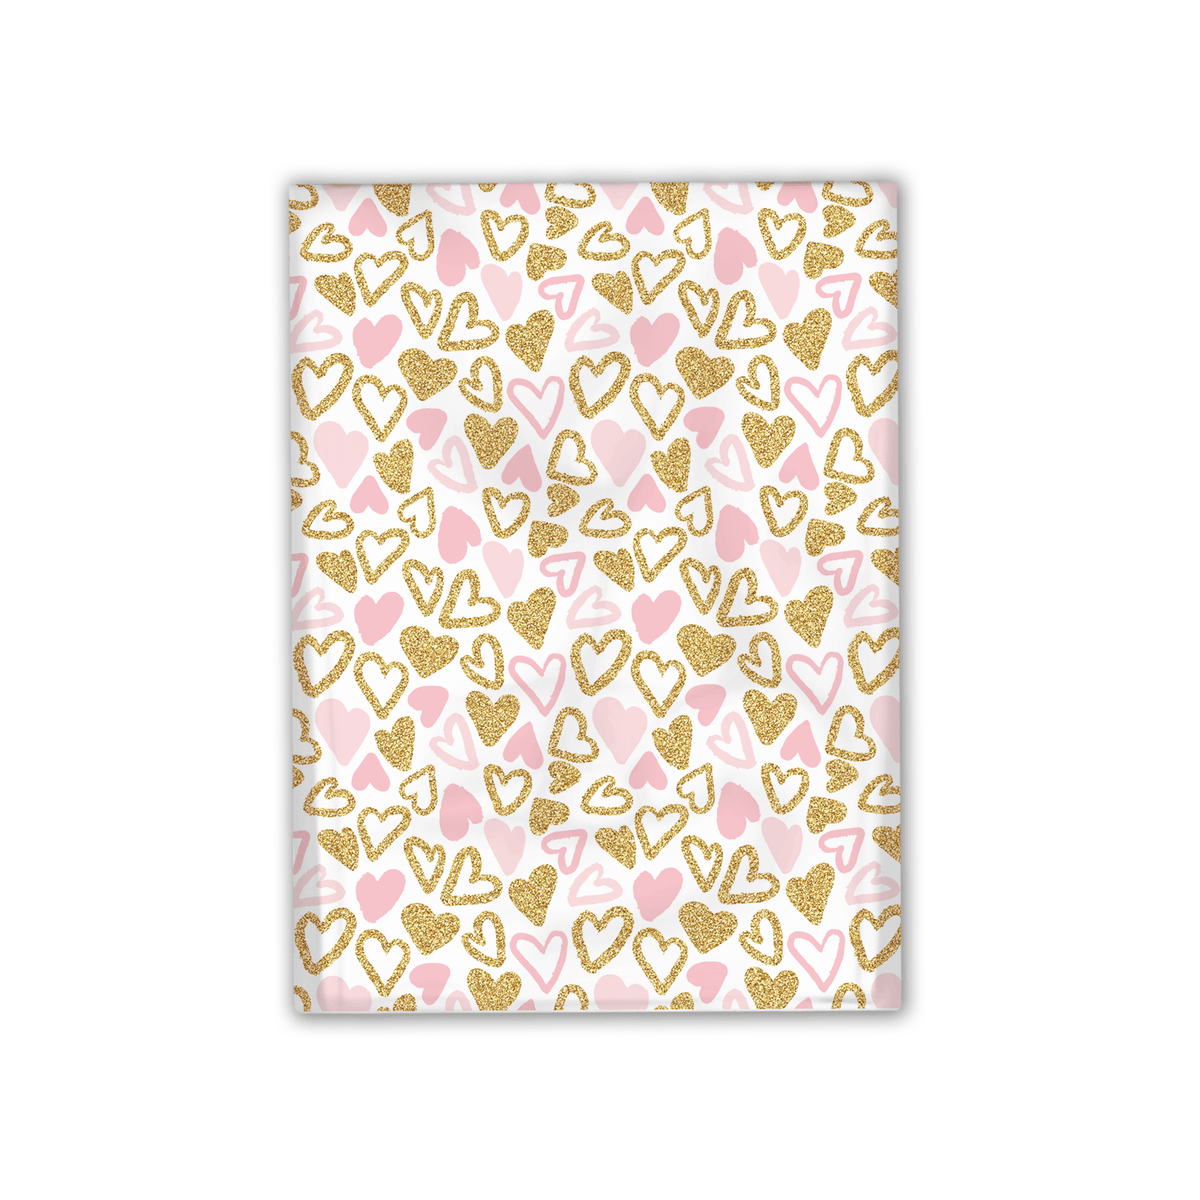 19x24" Pink and Gold Hearts Designer Poly Mailers Shipping Envelopes Premium Printed Bags - Pro Supply Global